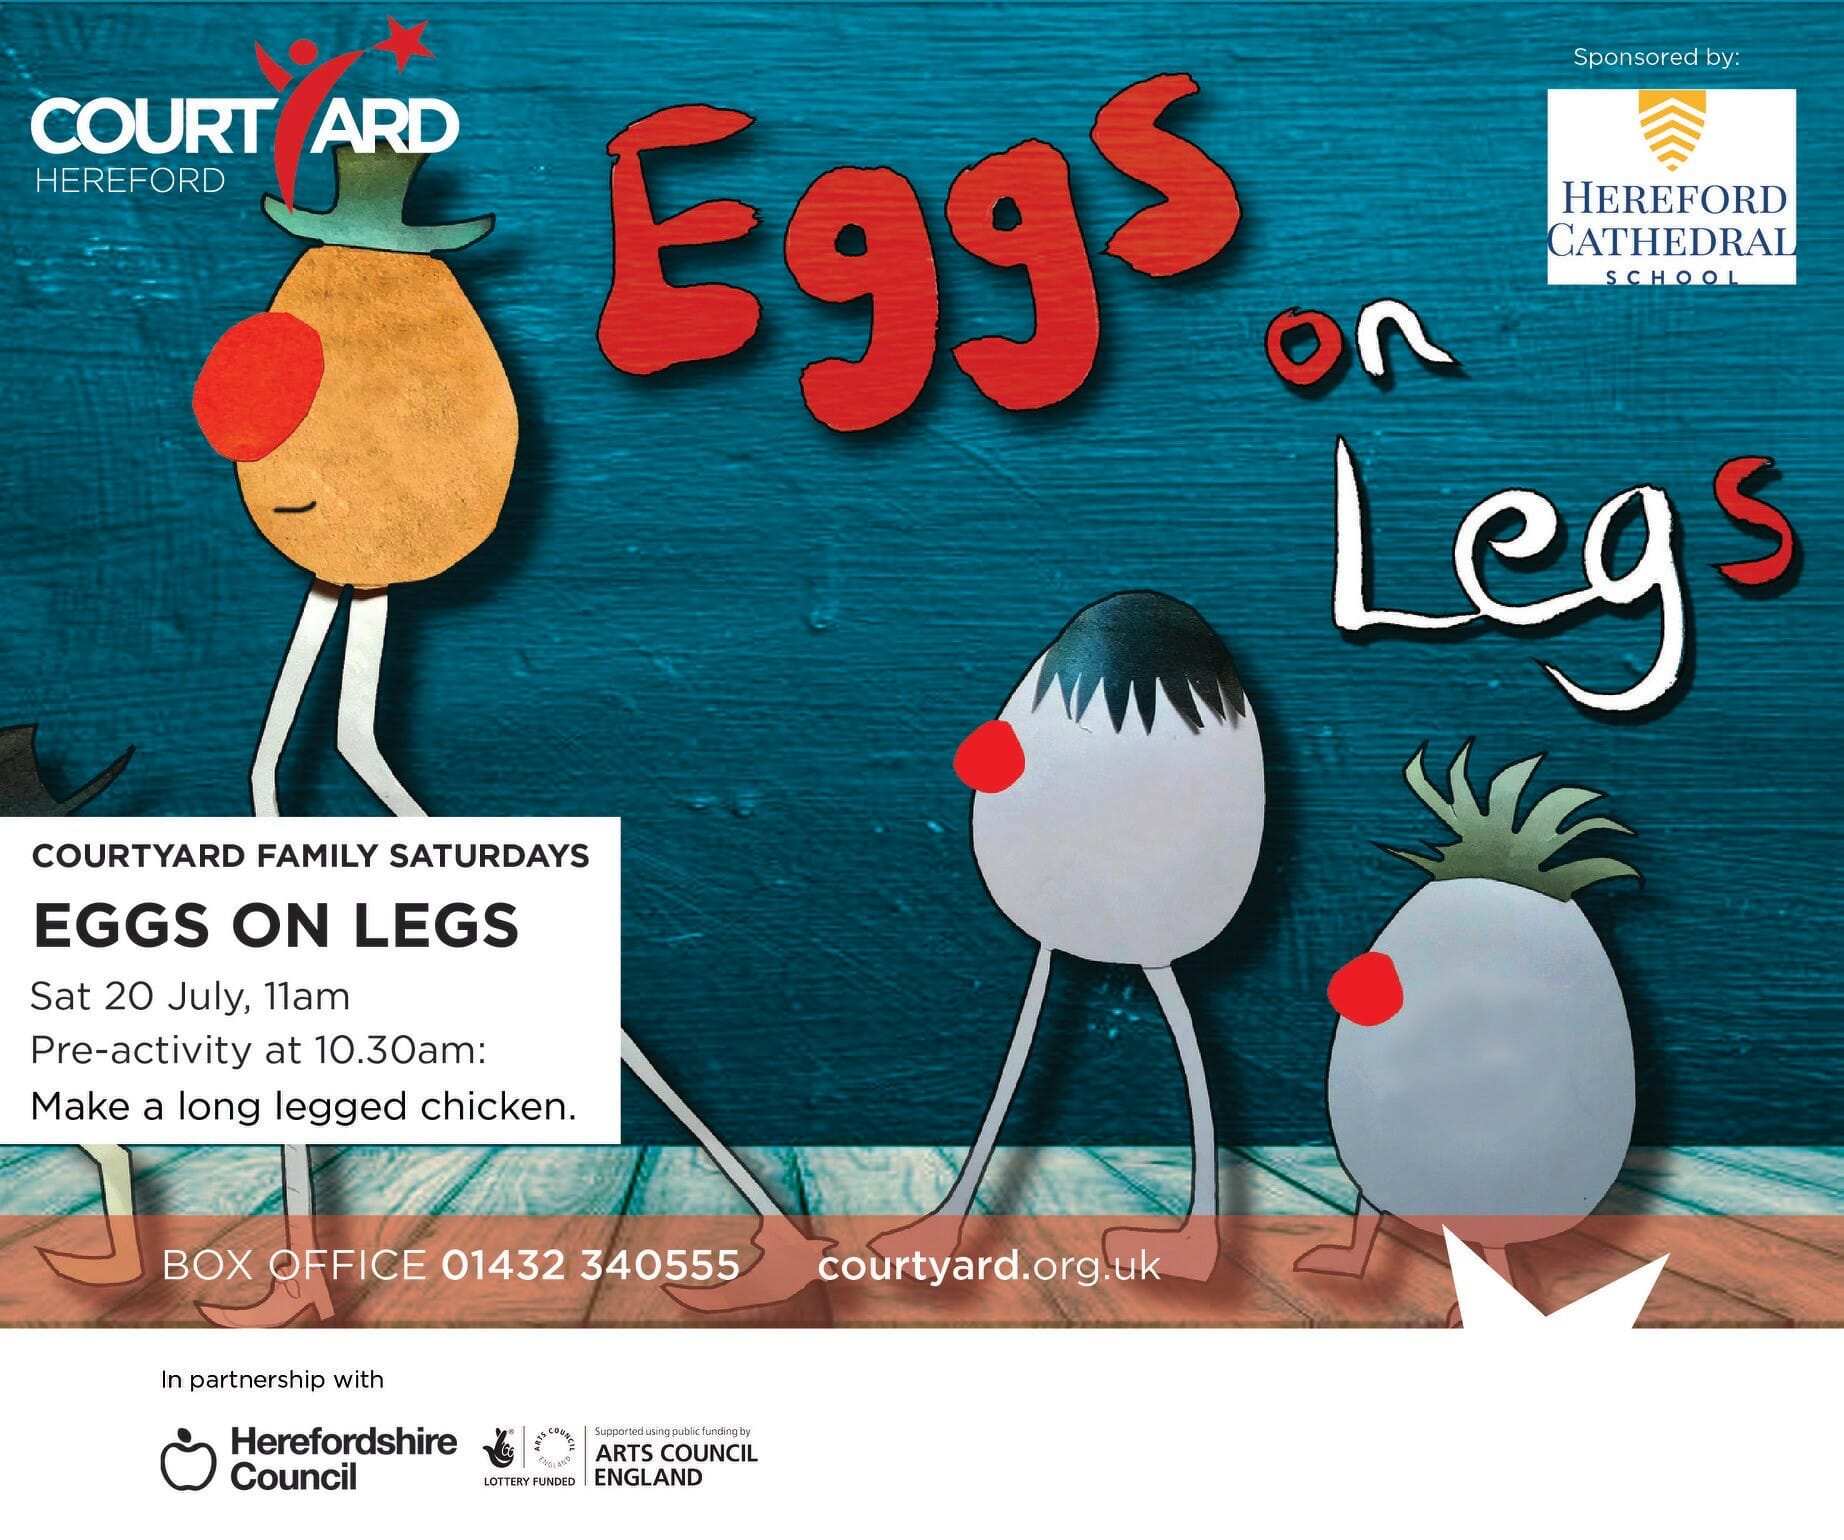 WHAT’S ON? | Eggs on Legs at The Courtyard